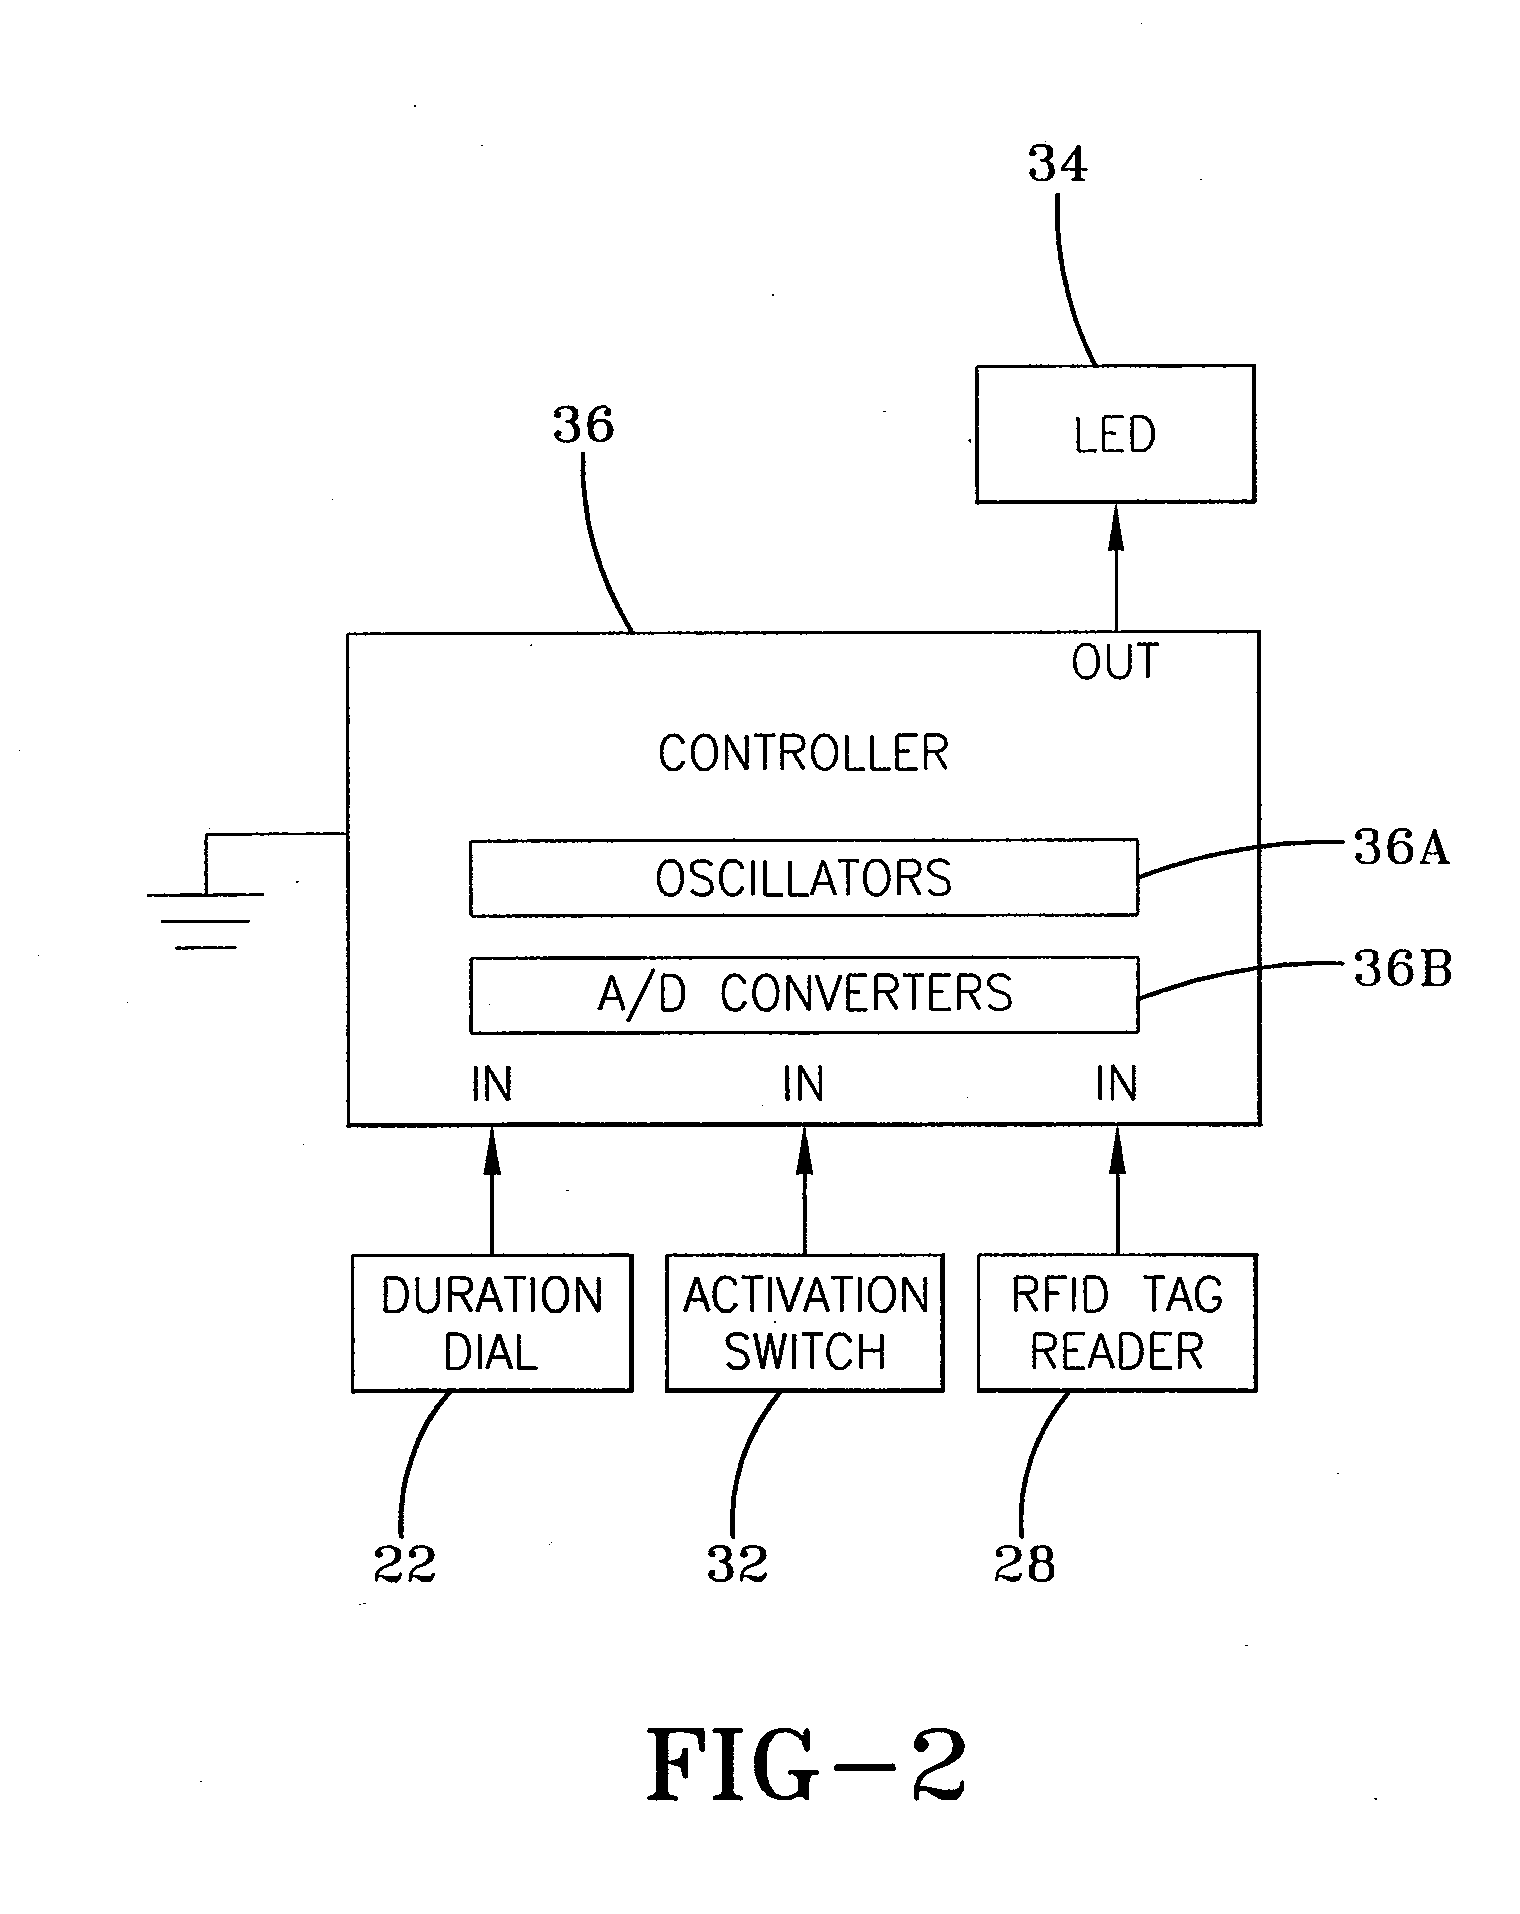 Method and device for indicating future need for product replacement of random-use dispensing